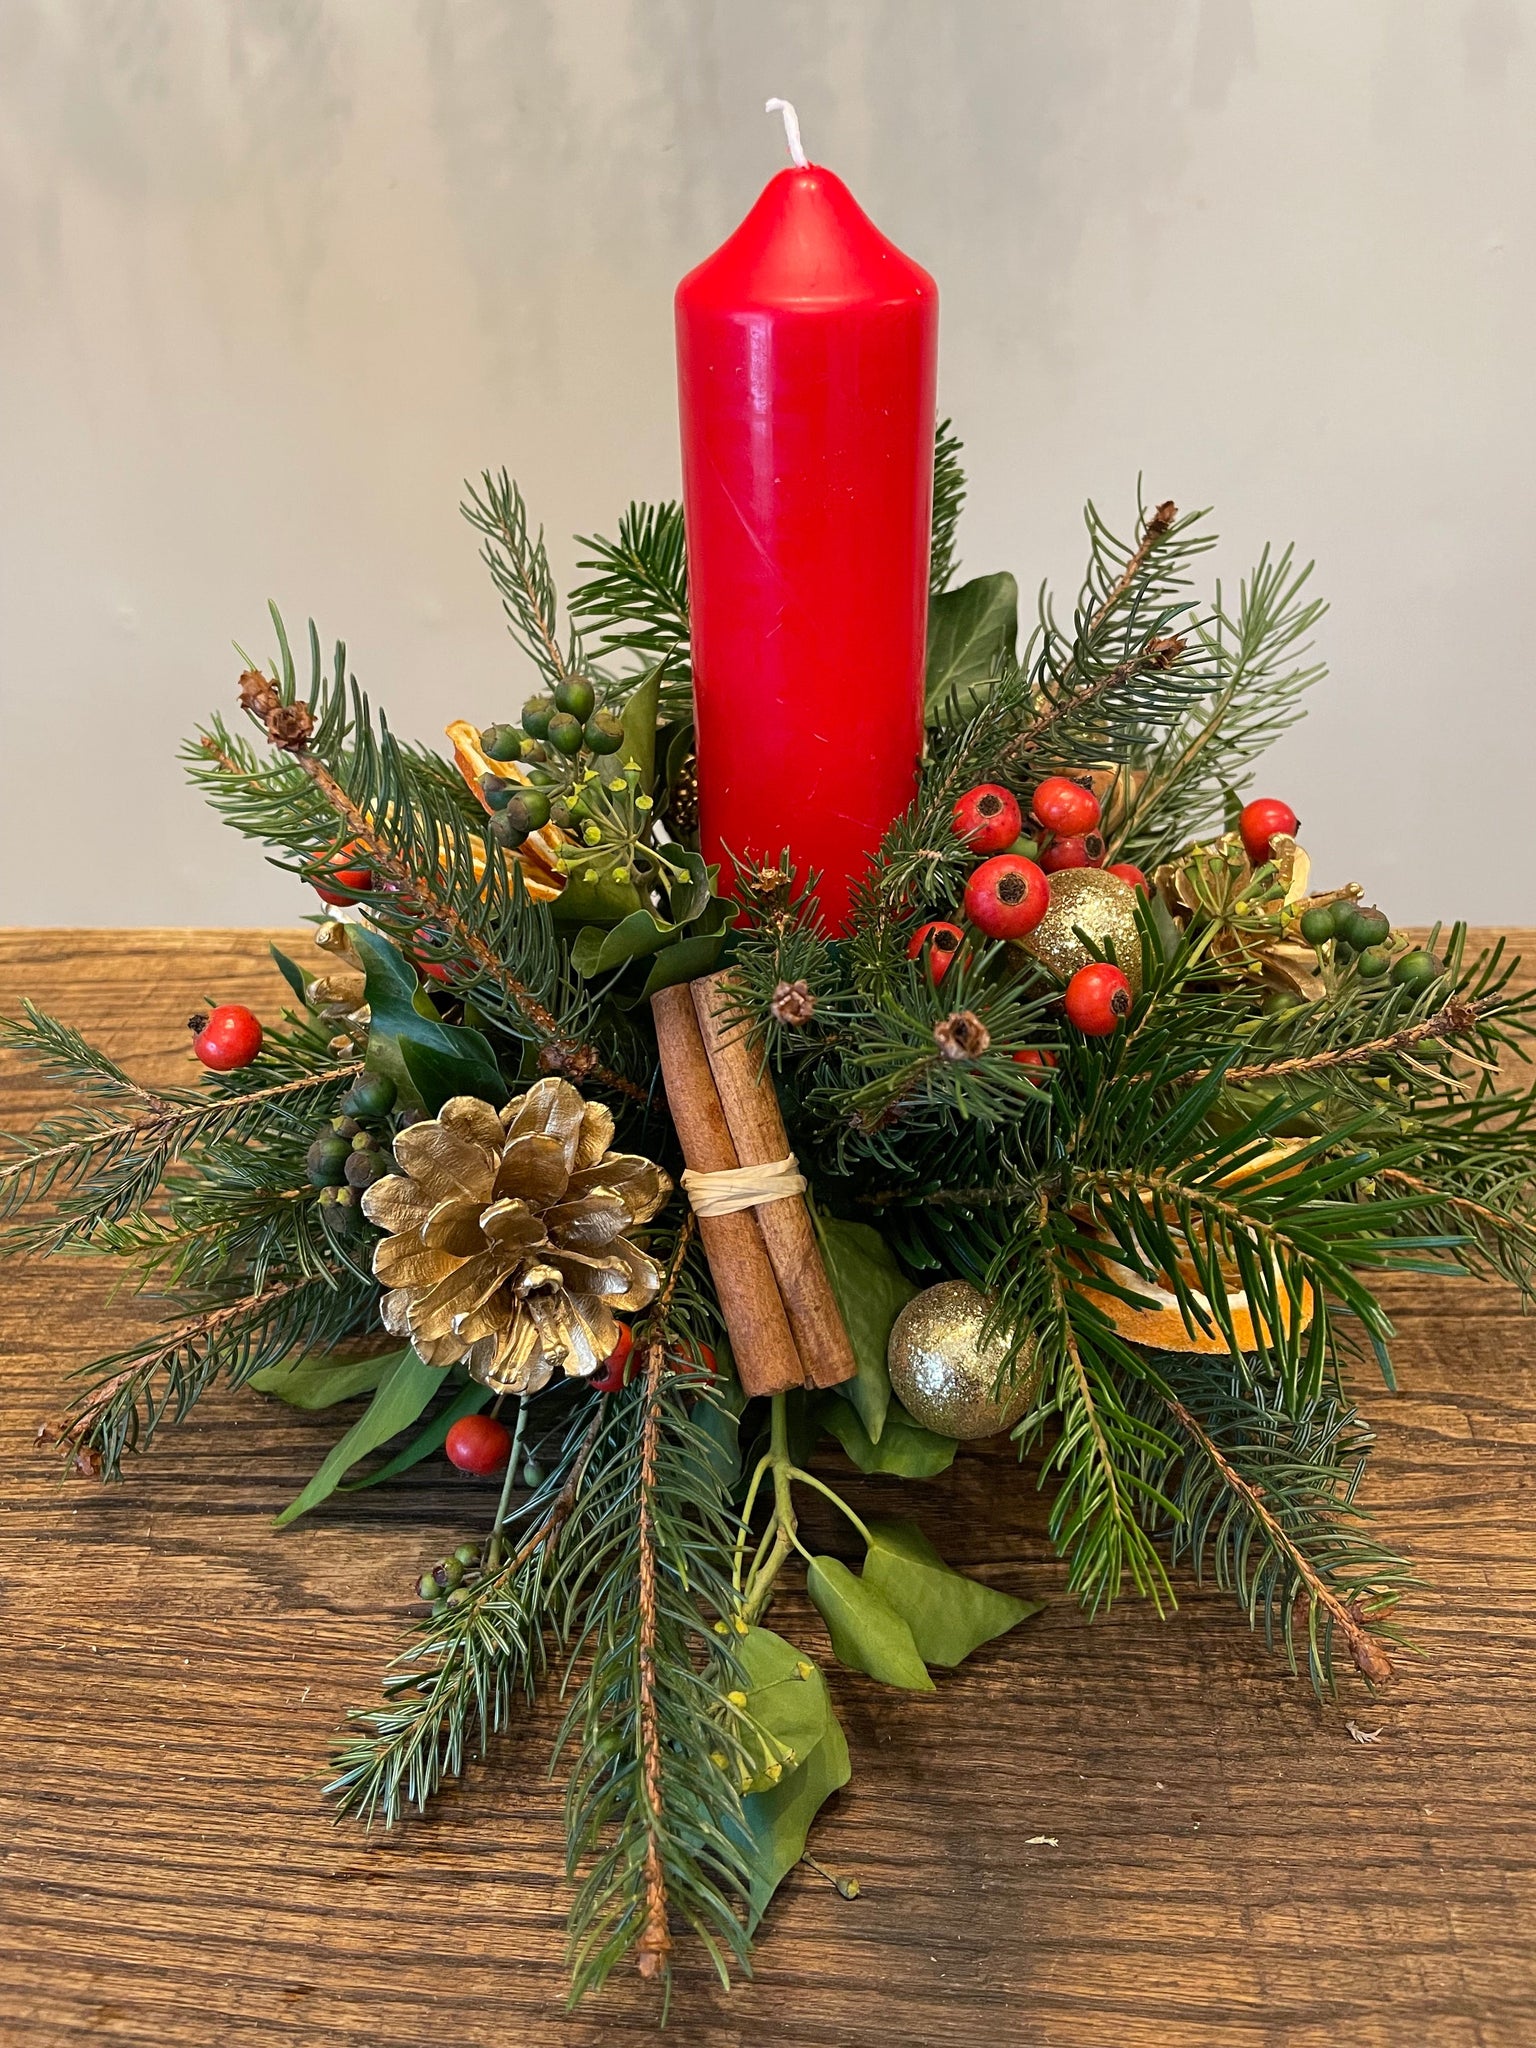 Christmas Table Centerpiece Workshop – Monday 18th December, Starting @ 11am (£75 per person) 2 hours